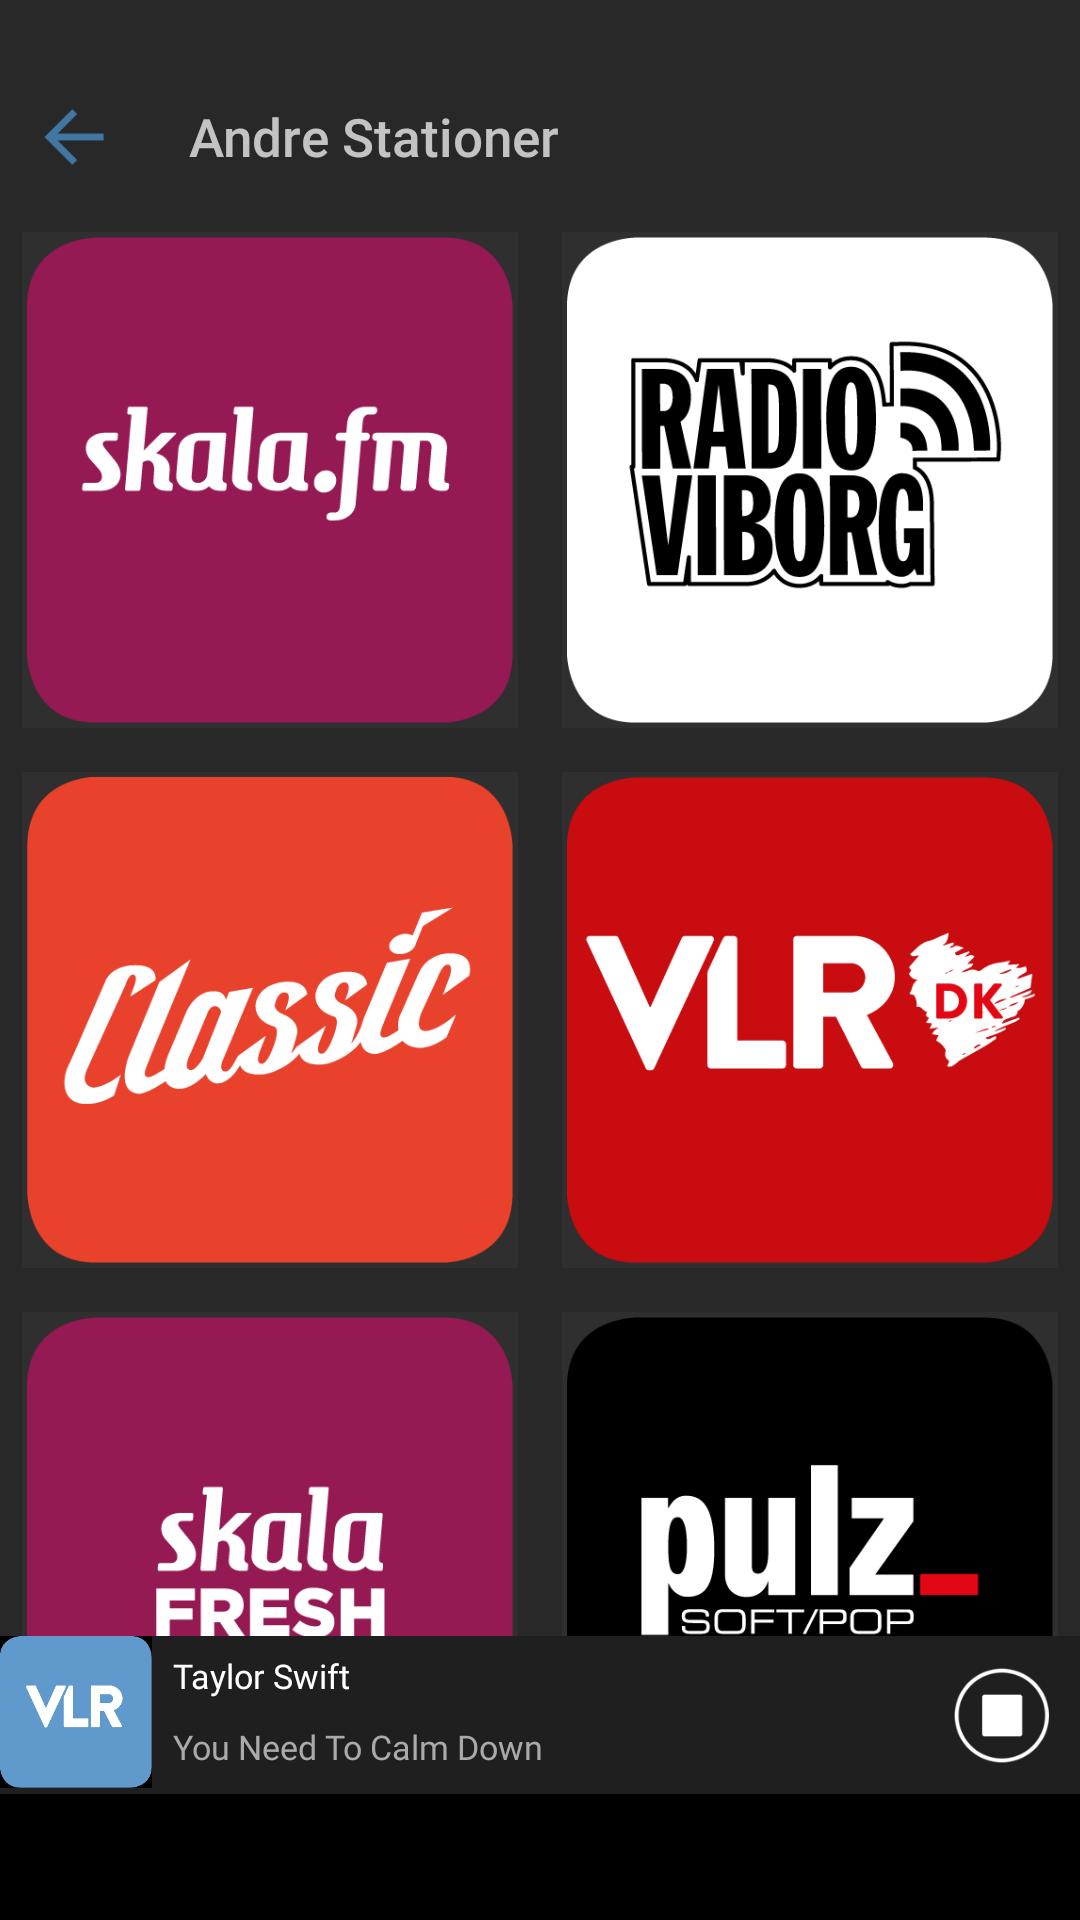 Radio VLR for Android - APK Download